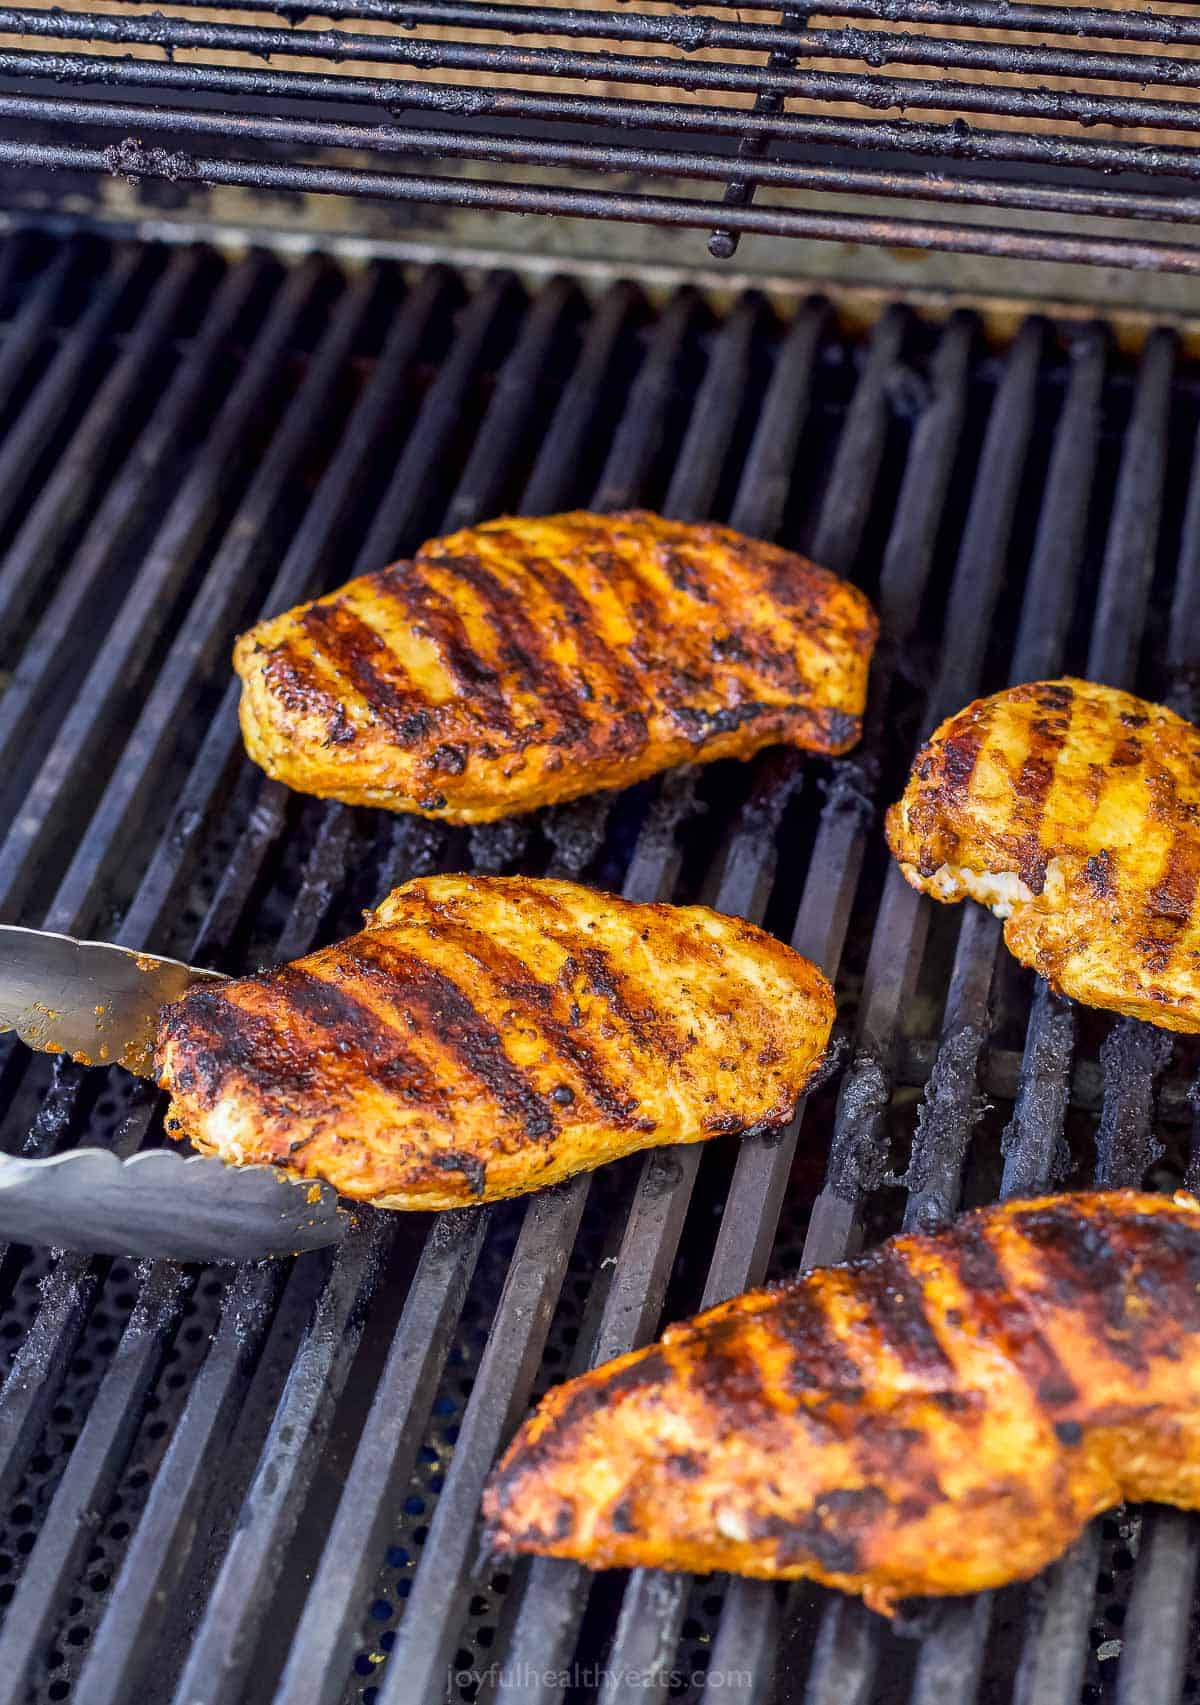 Four chicken breasts searing on a grill with a pair of tongs grasping one of them